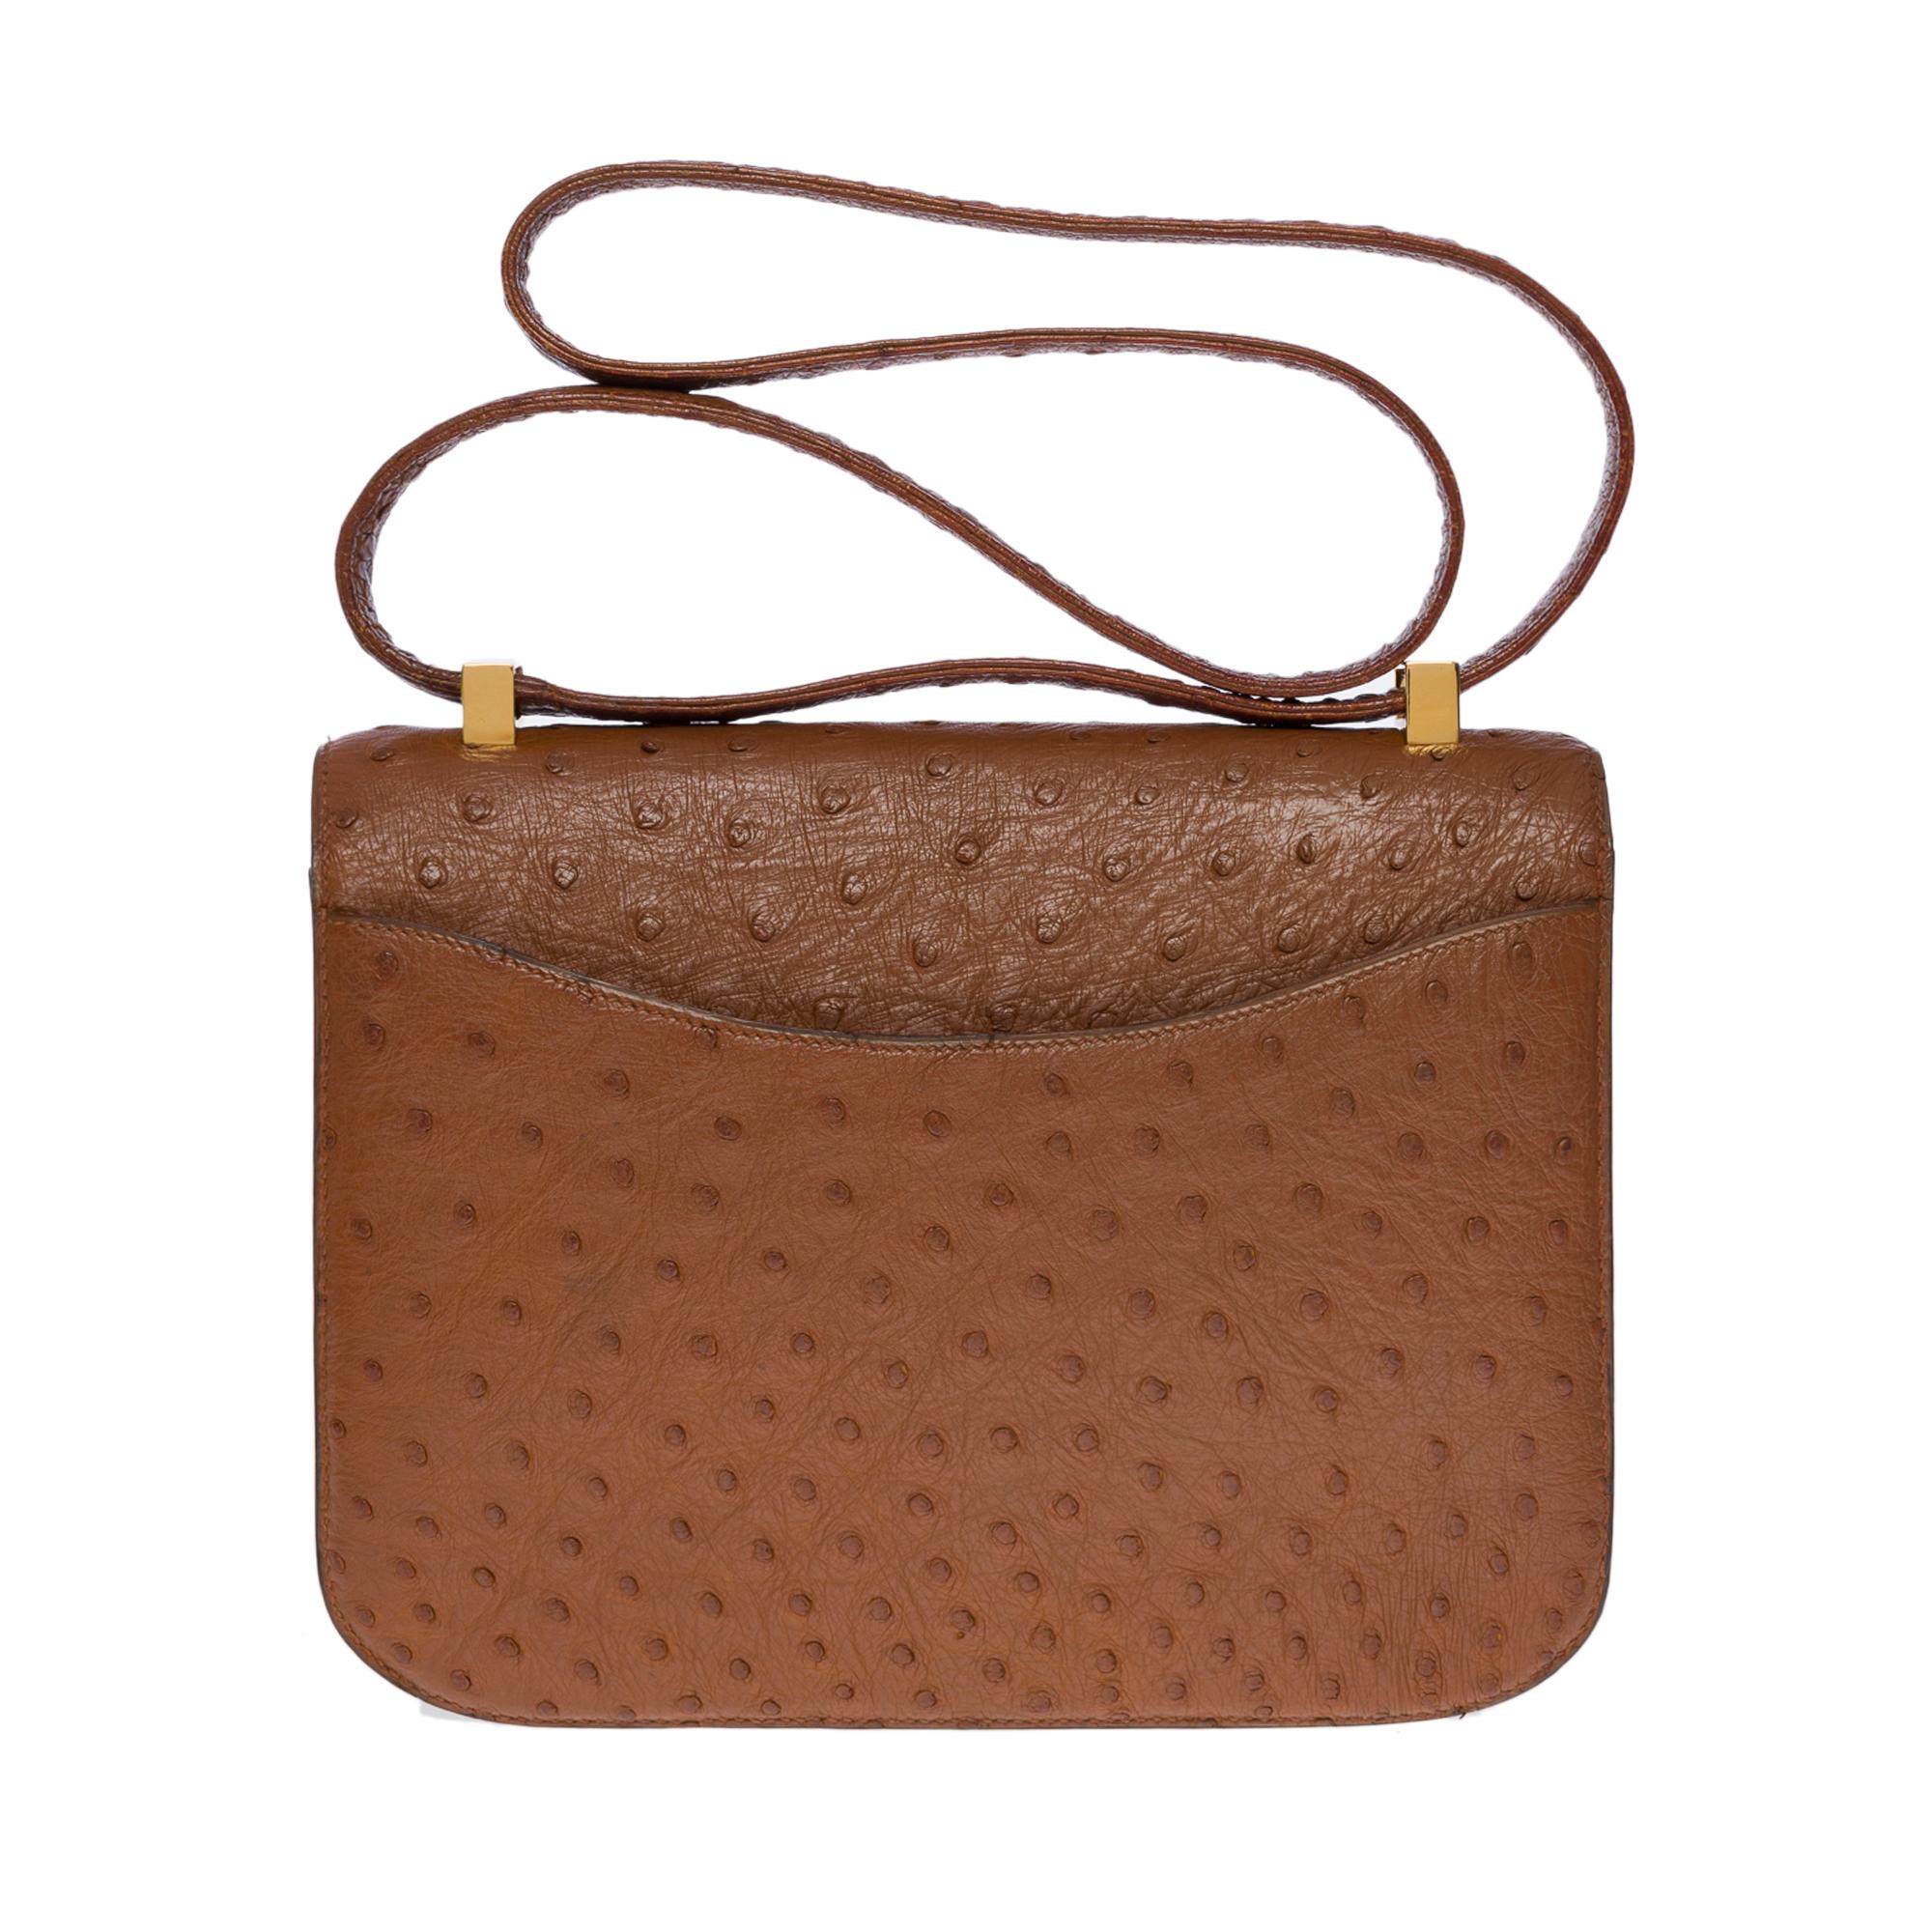 Collector Hermes Constance 23 shoulder bag in hazelnut Ostrich , gold plated metal hardware, handle convertible in ostrich hazelnut allowing a hand or shoulder support

Zipper on flap
A patch pocket on the back of the bag
Inner lining in hazelnut